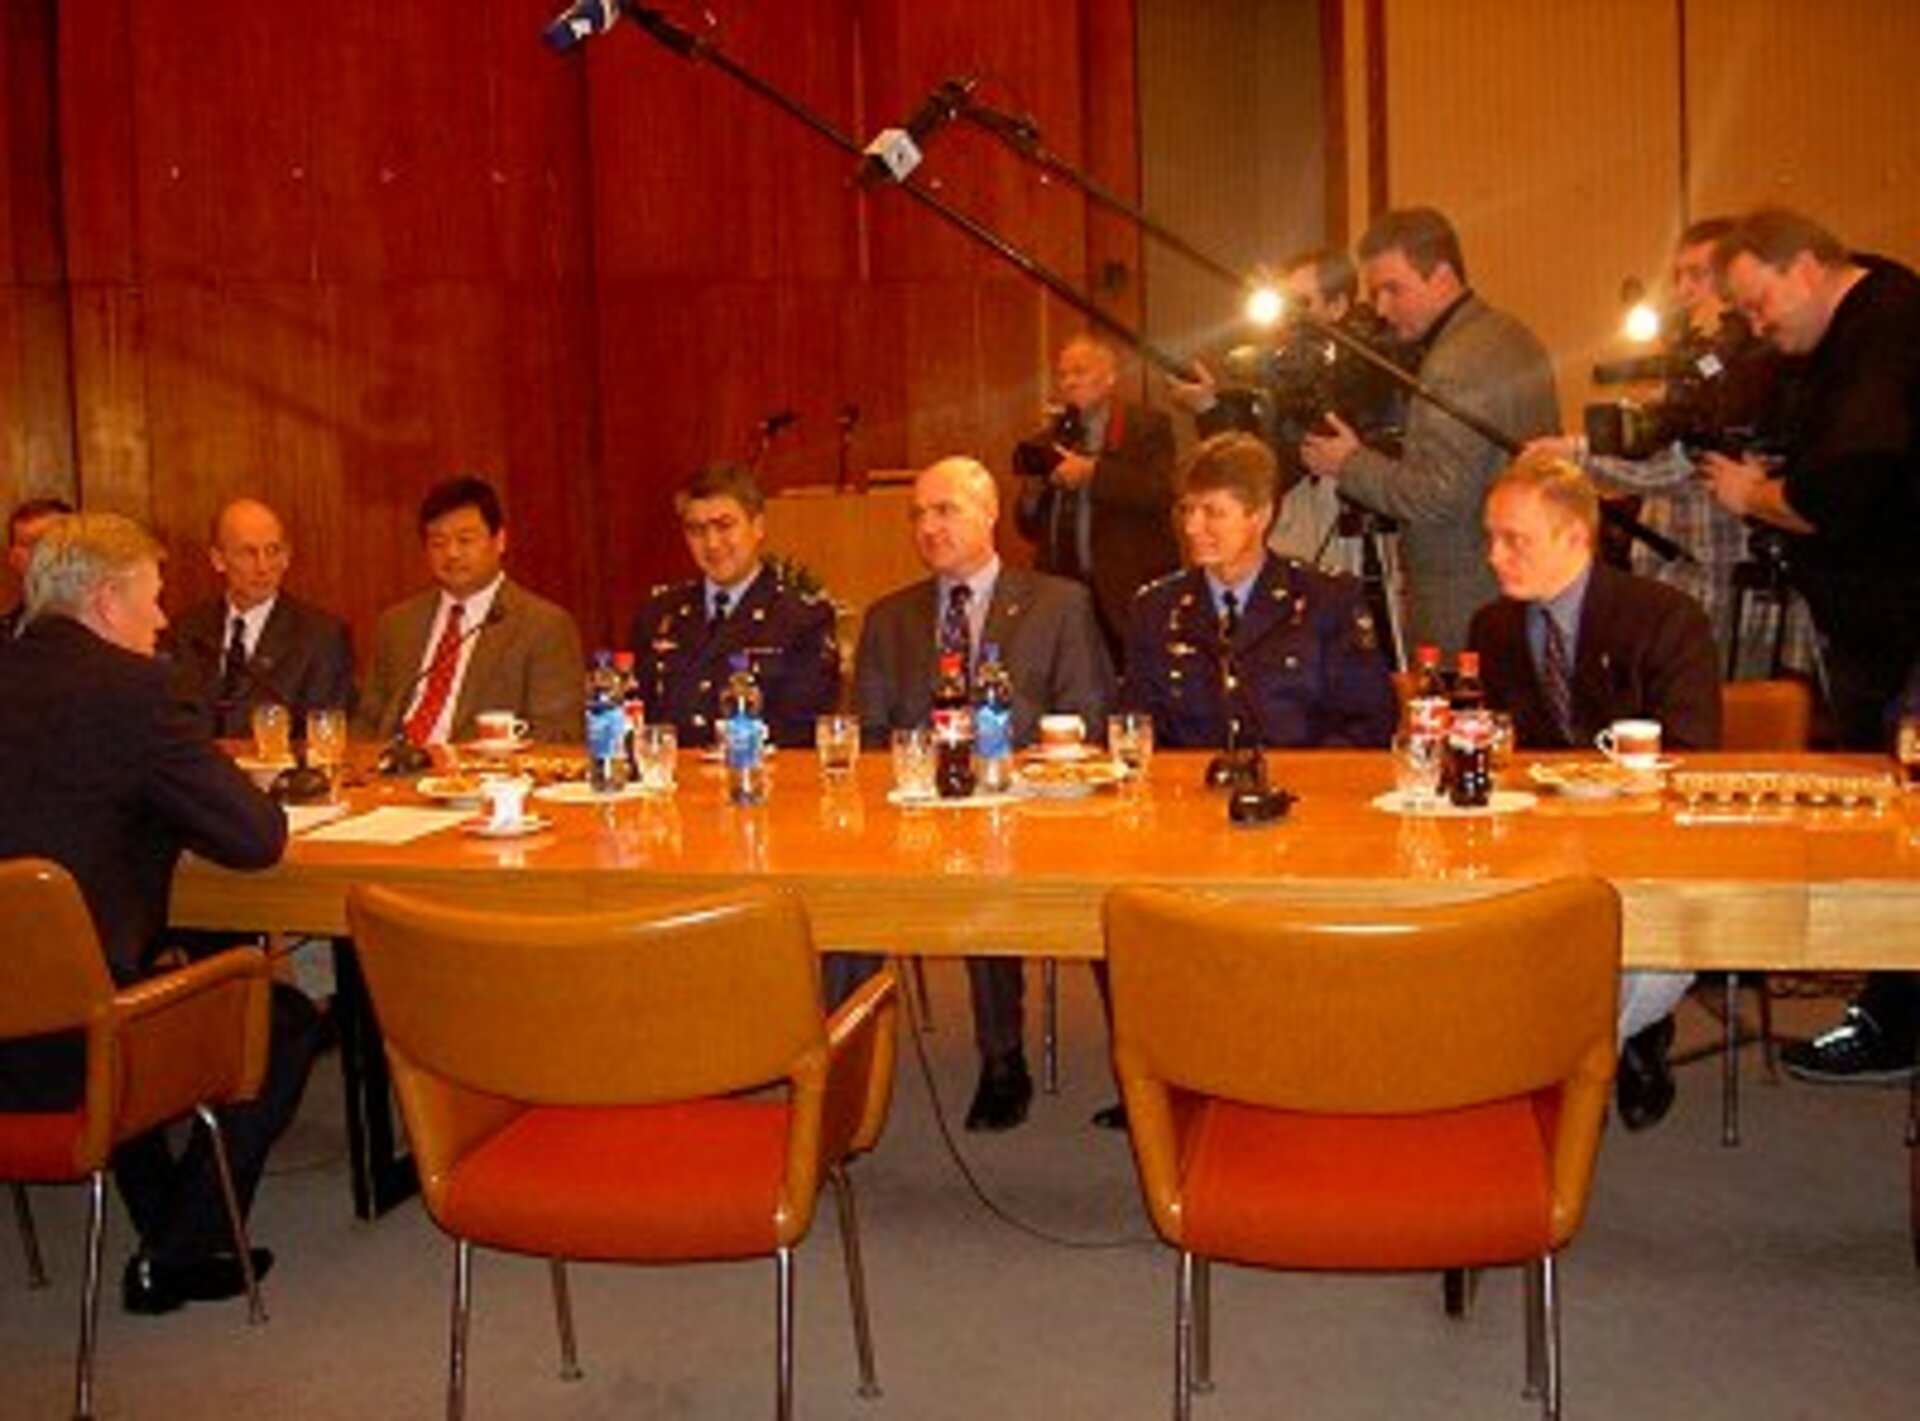 During meeting with the head of the Russian space agency